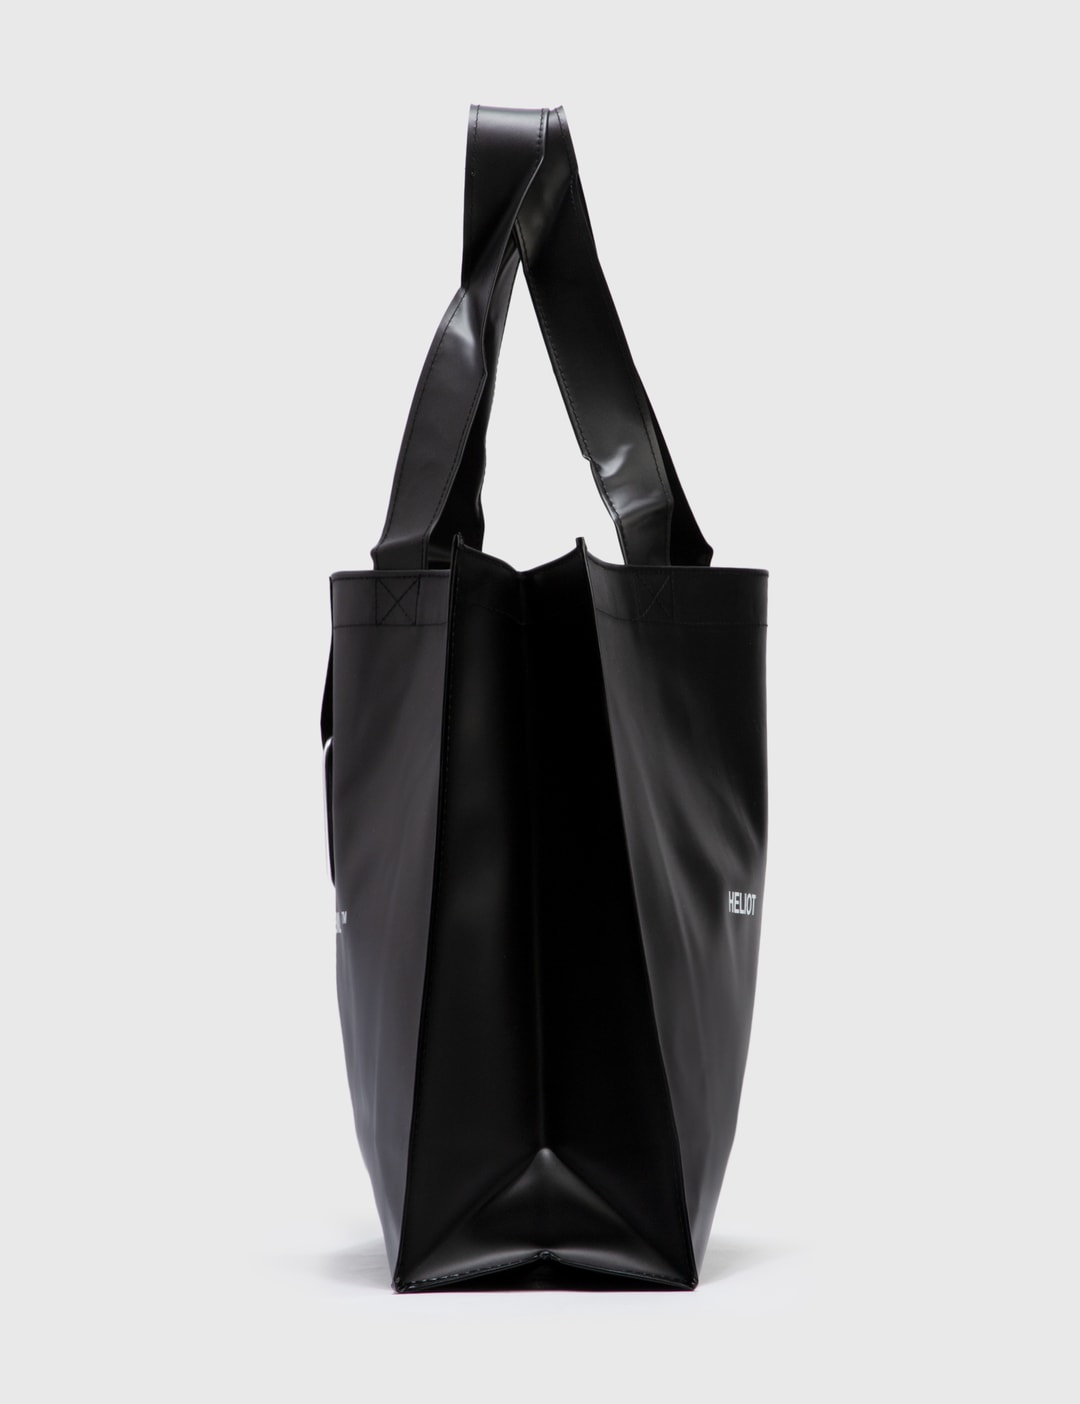 Heliot Emil - Rubber Tote Bag | HBX - Globally Curated Fashion and ...